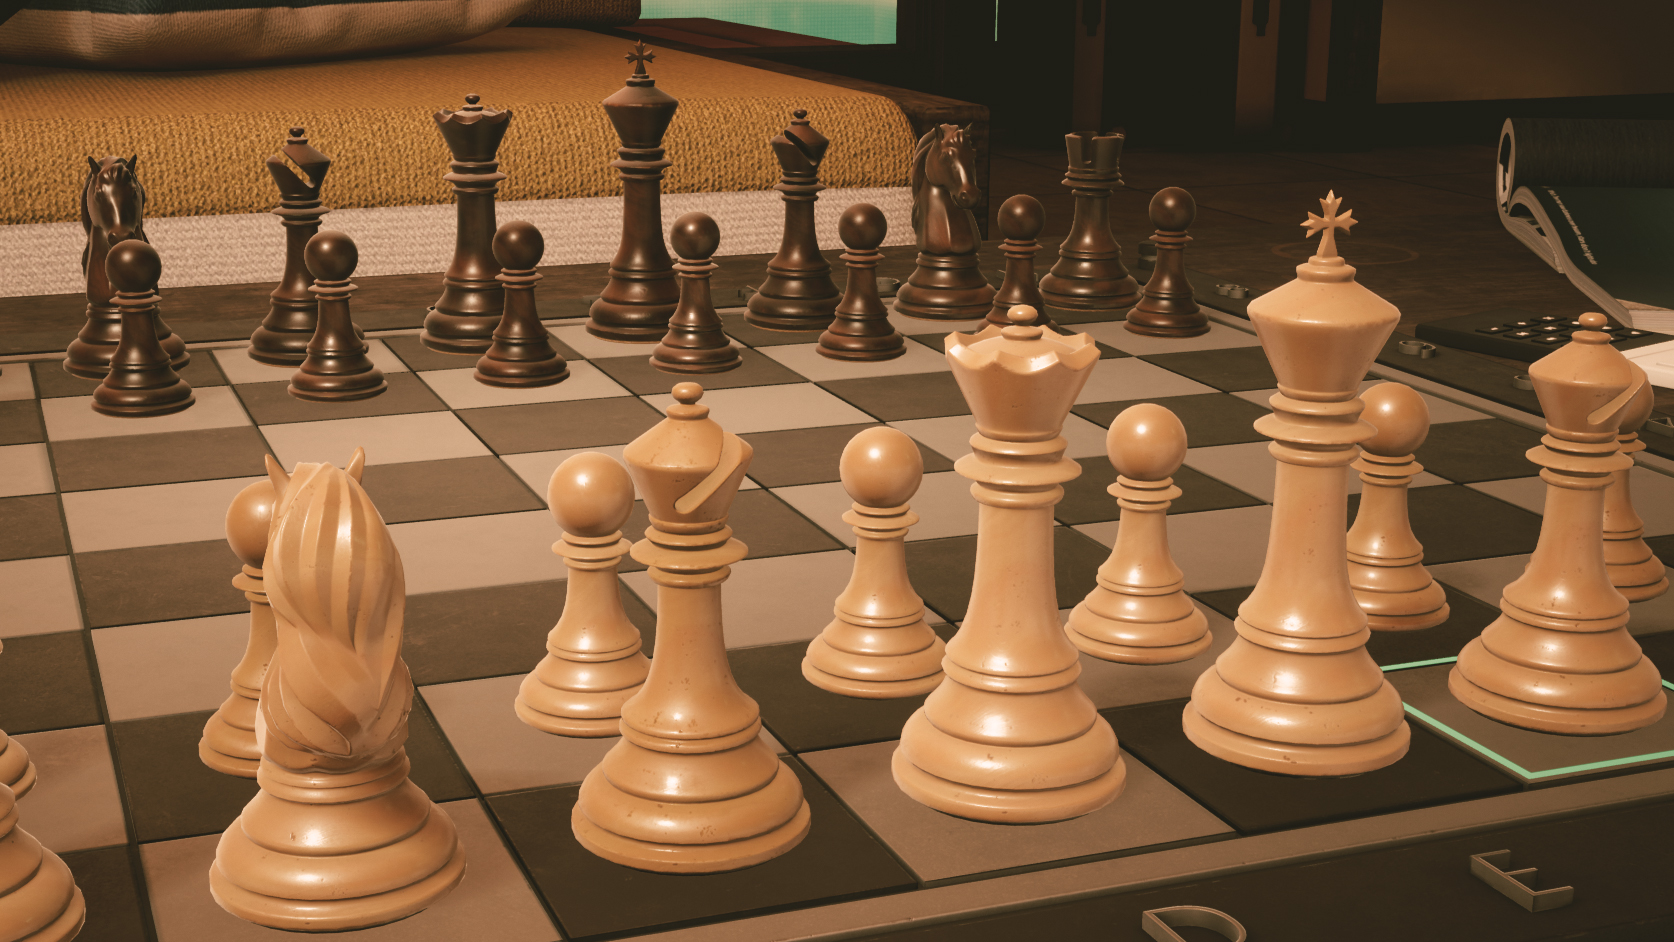 3d chess game for pc free download full version for windows 10